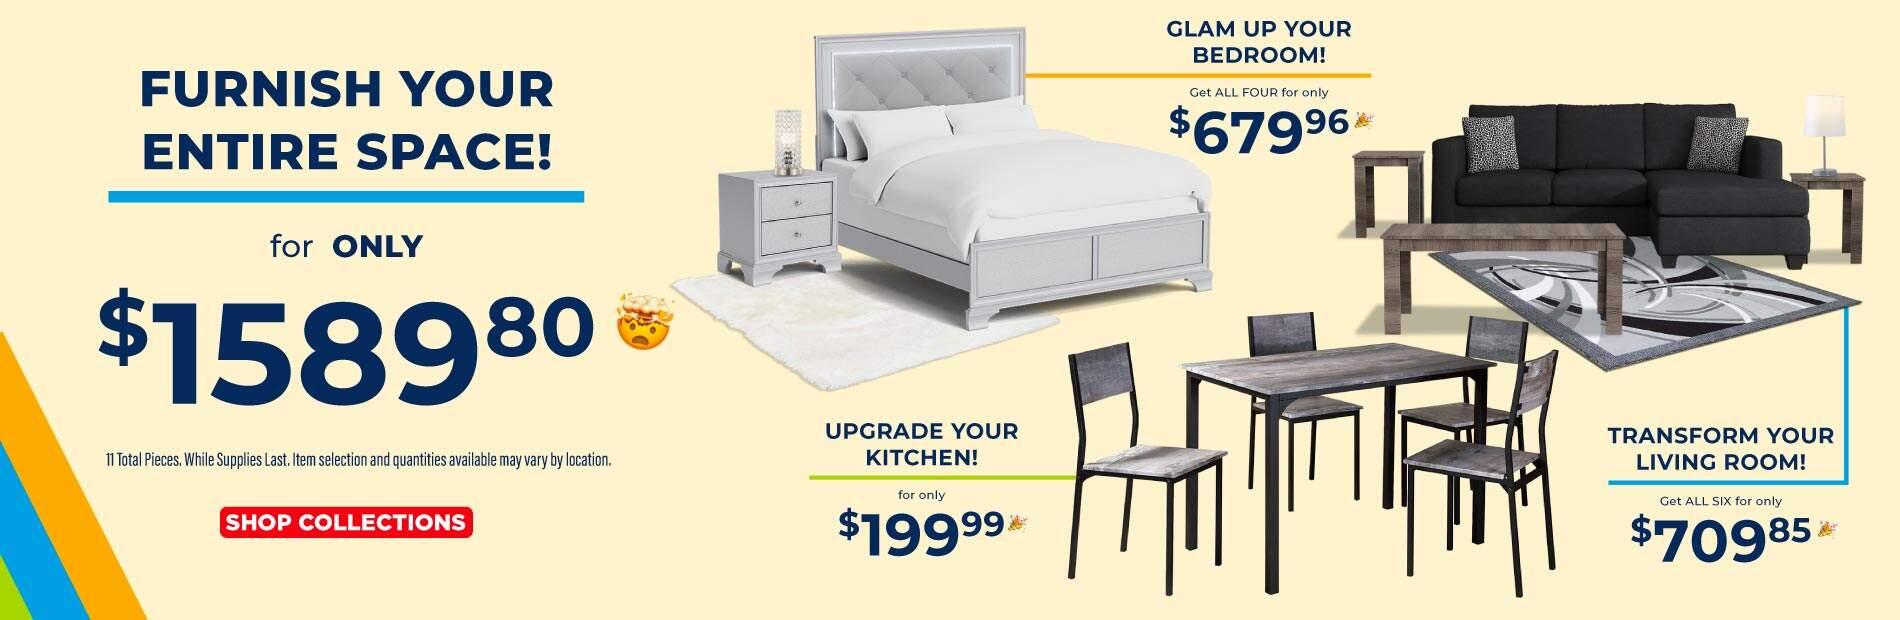 Furnish your entire space! for only $1589.80. 11 Totals pieces. While supplies last. Item selection and quantities may vary by location. Shop Collections. Glam up your bedroom! Get all for only $679.96. Transform your living room! Get all six for only $709.85. Upgrade your kitchen! for only $199.99.